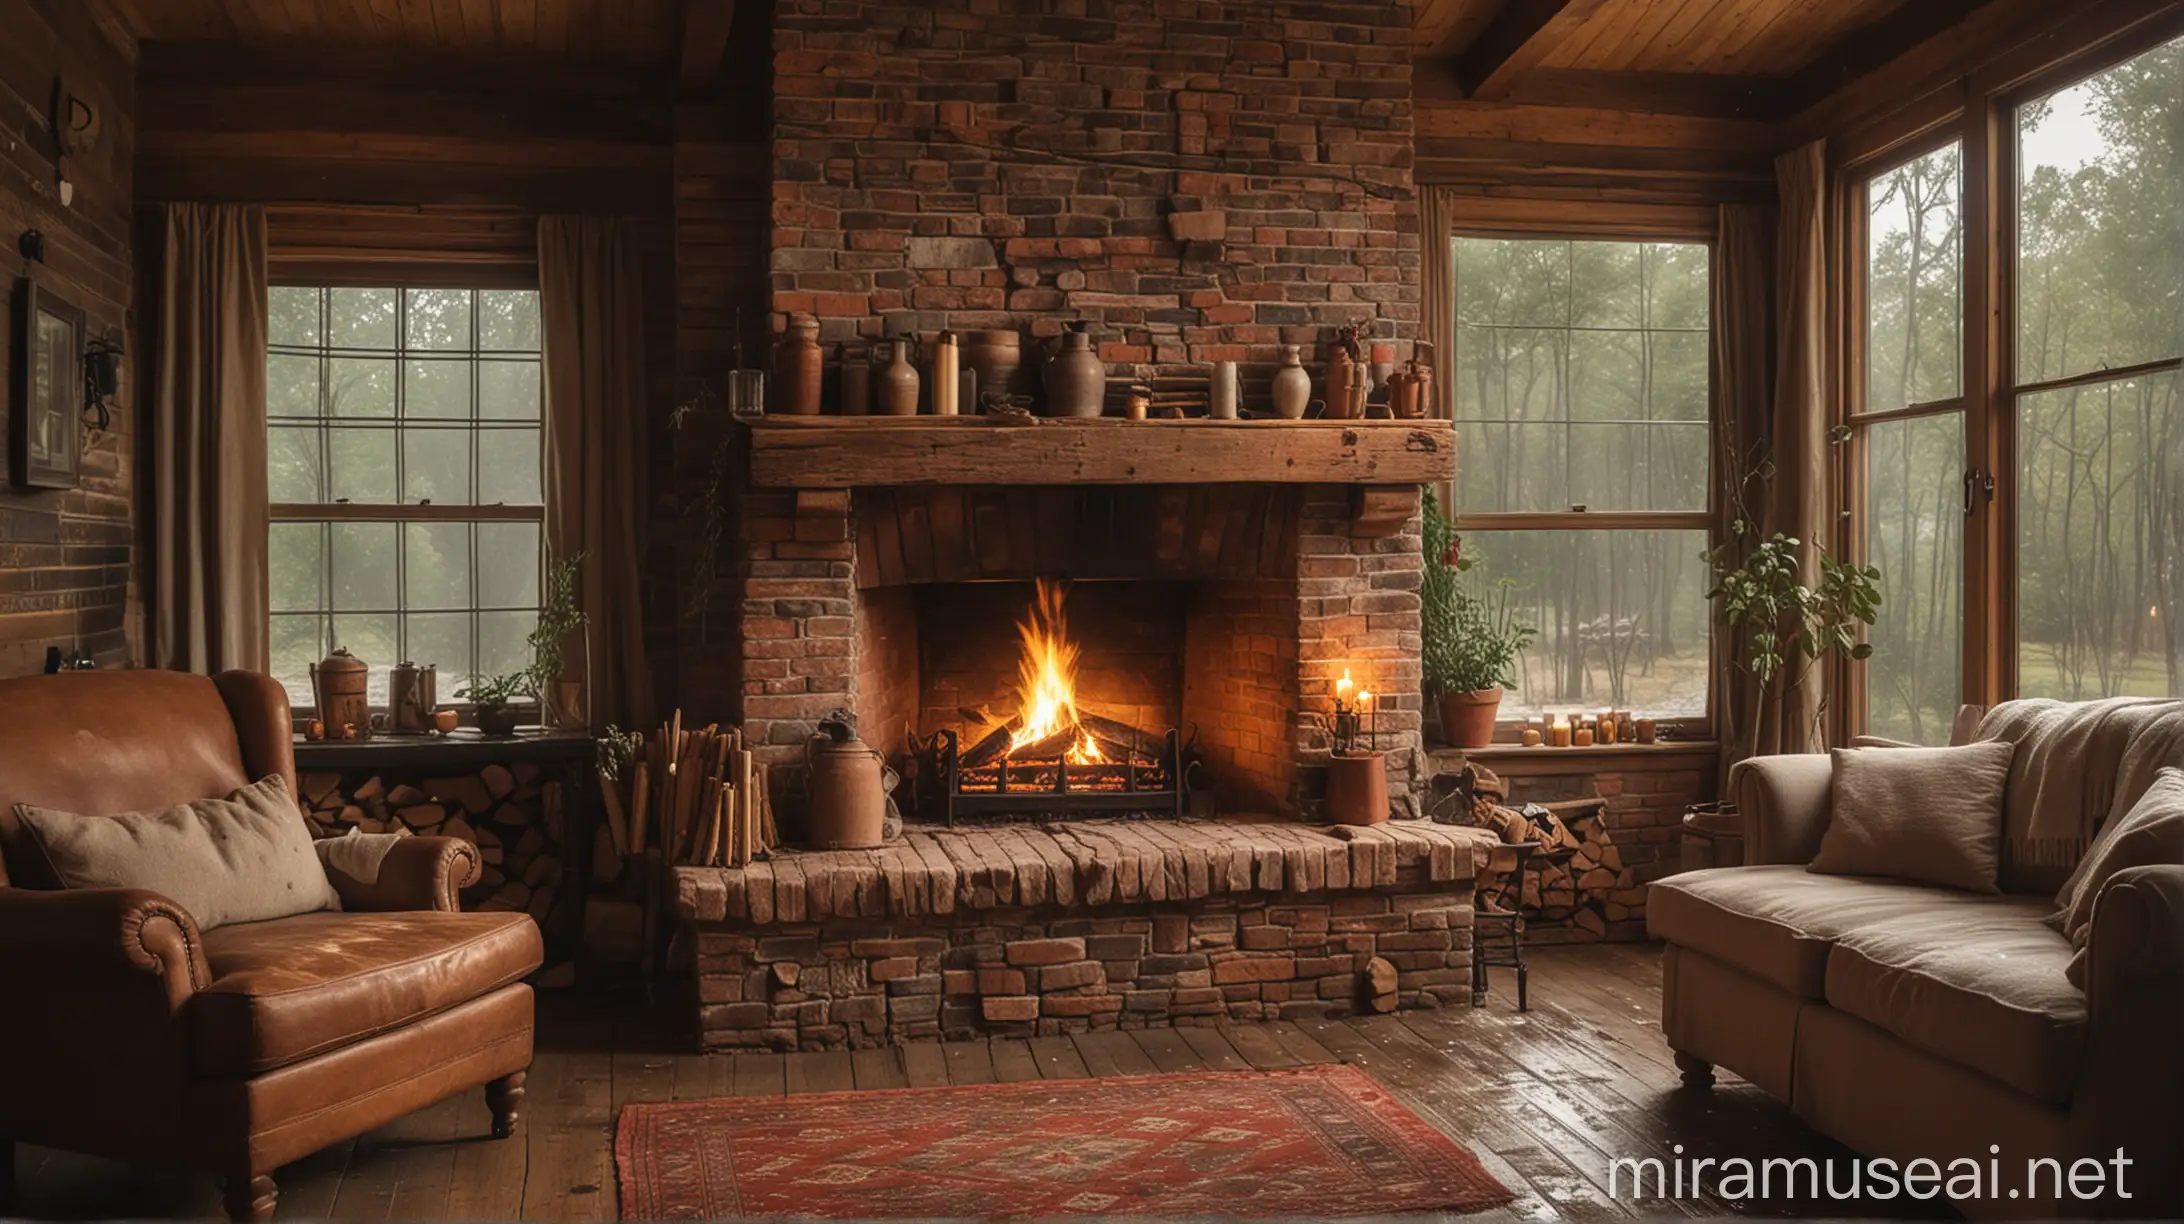 Cozy Cabin Interior with Fireplace and Rainy Village Views